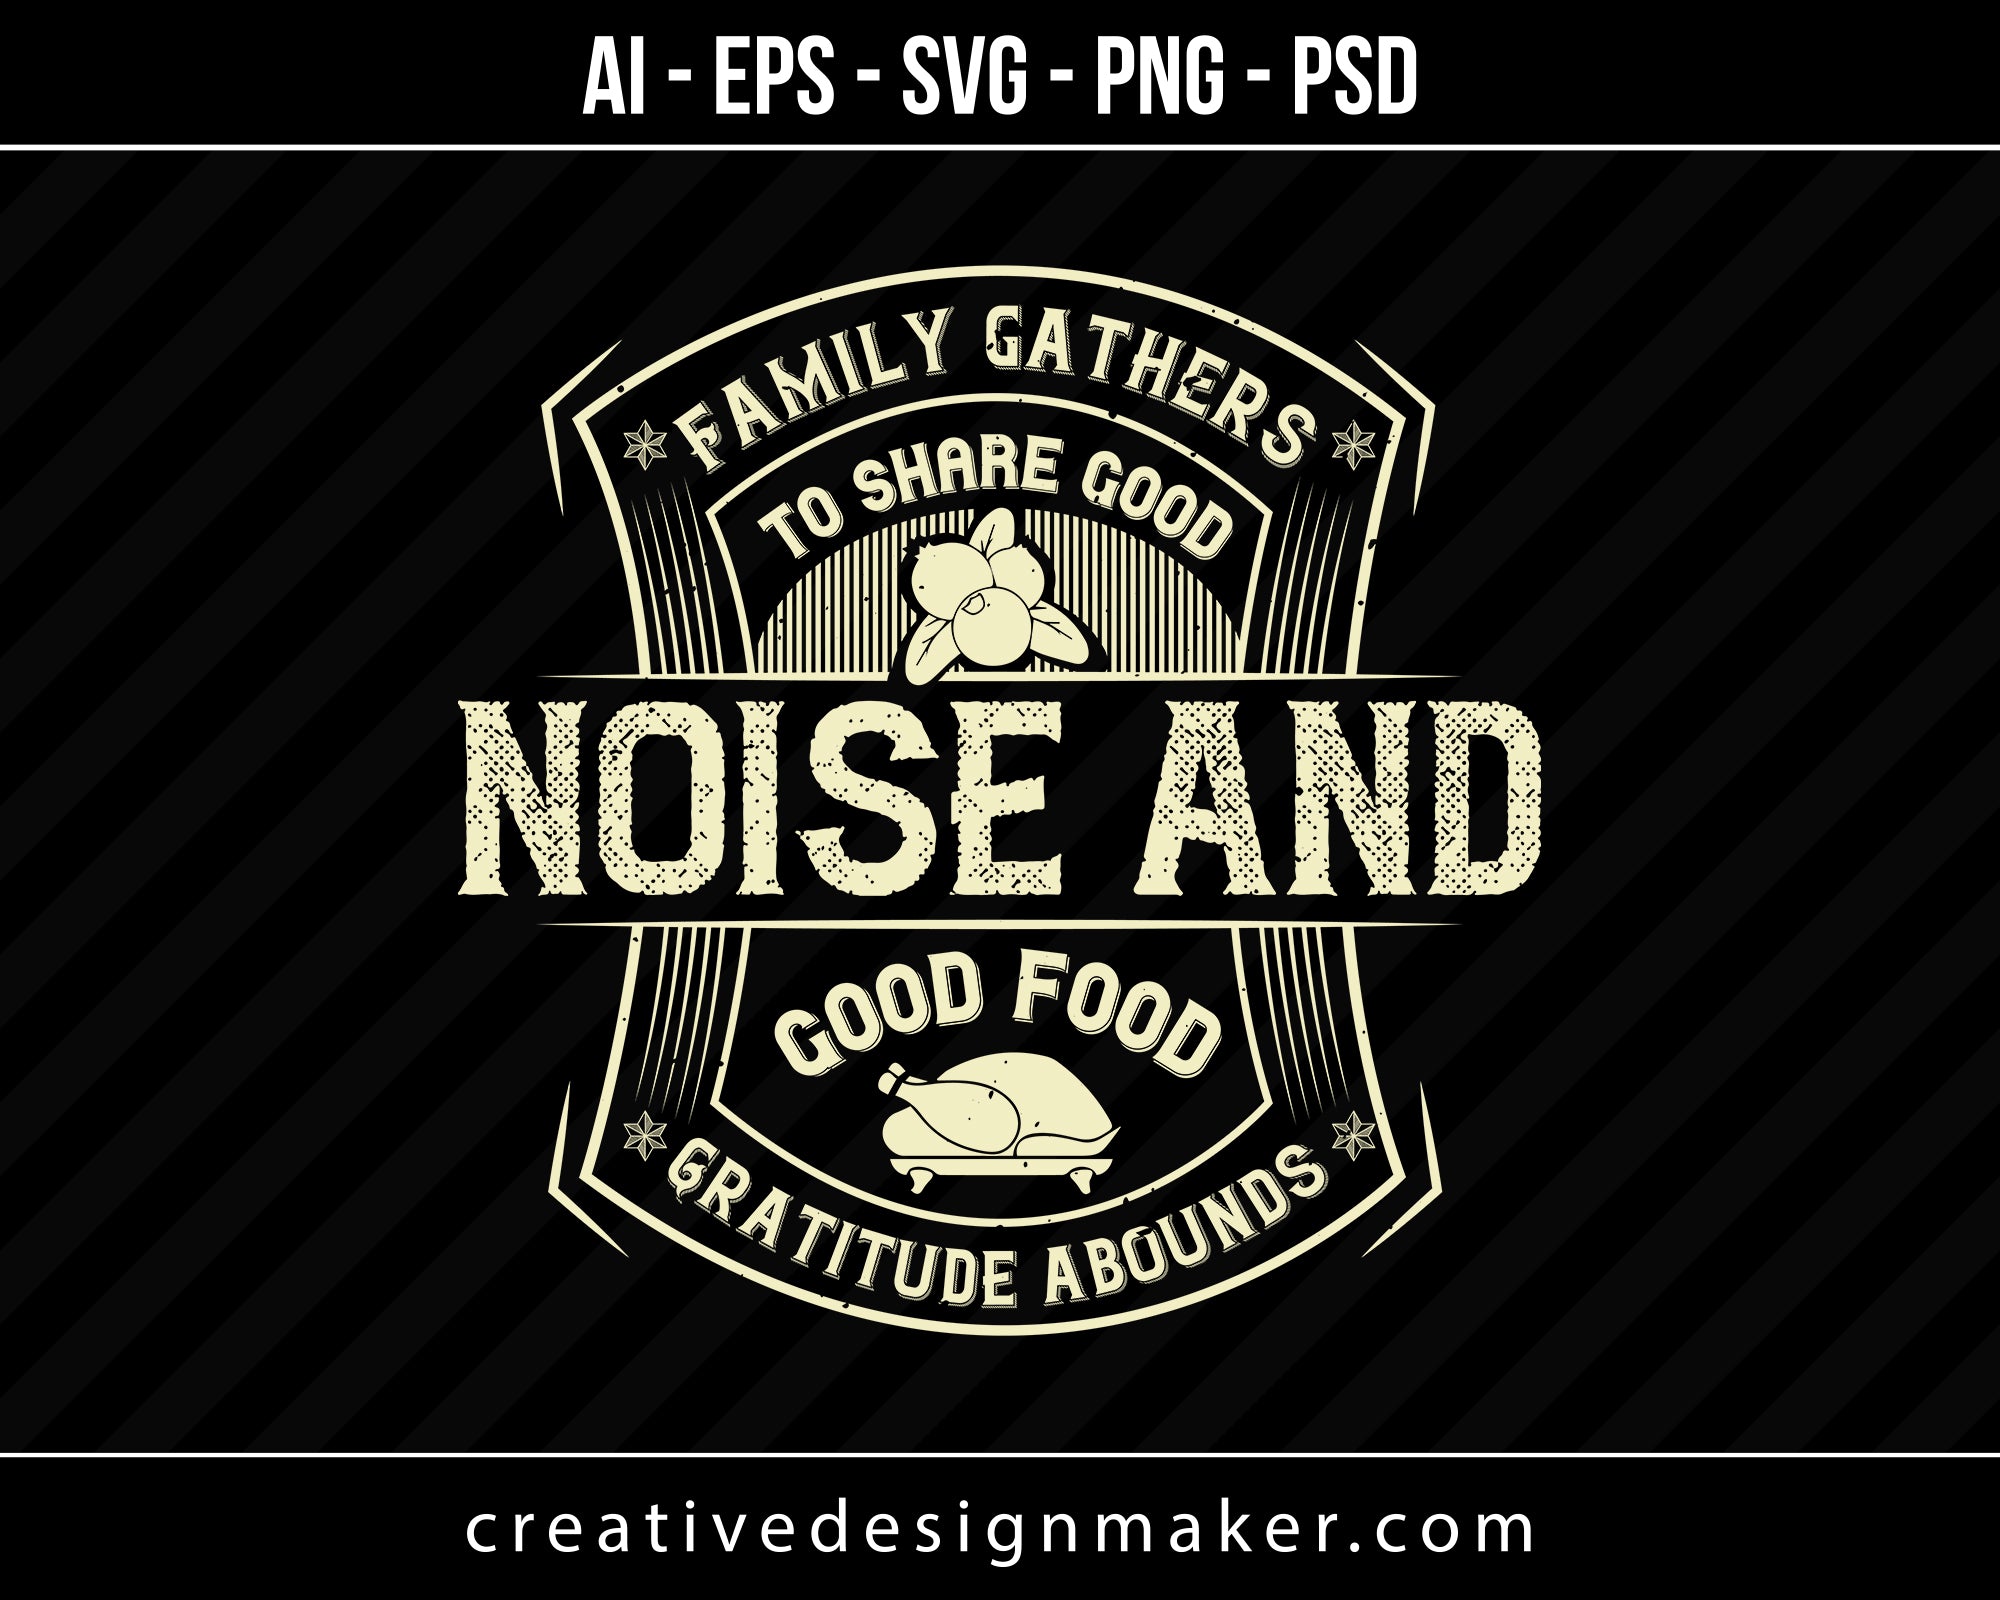 Family gathers to share good noise and good food. Gratitude abounds Thanksgiving Print Ready Editable T-Shirt SVG Design!